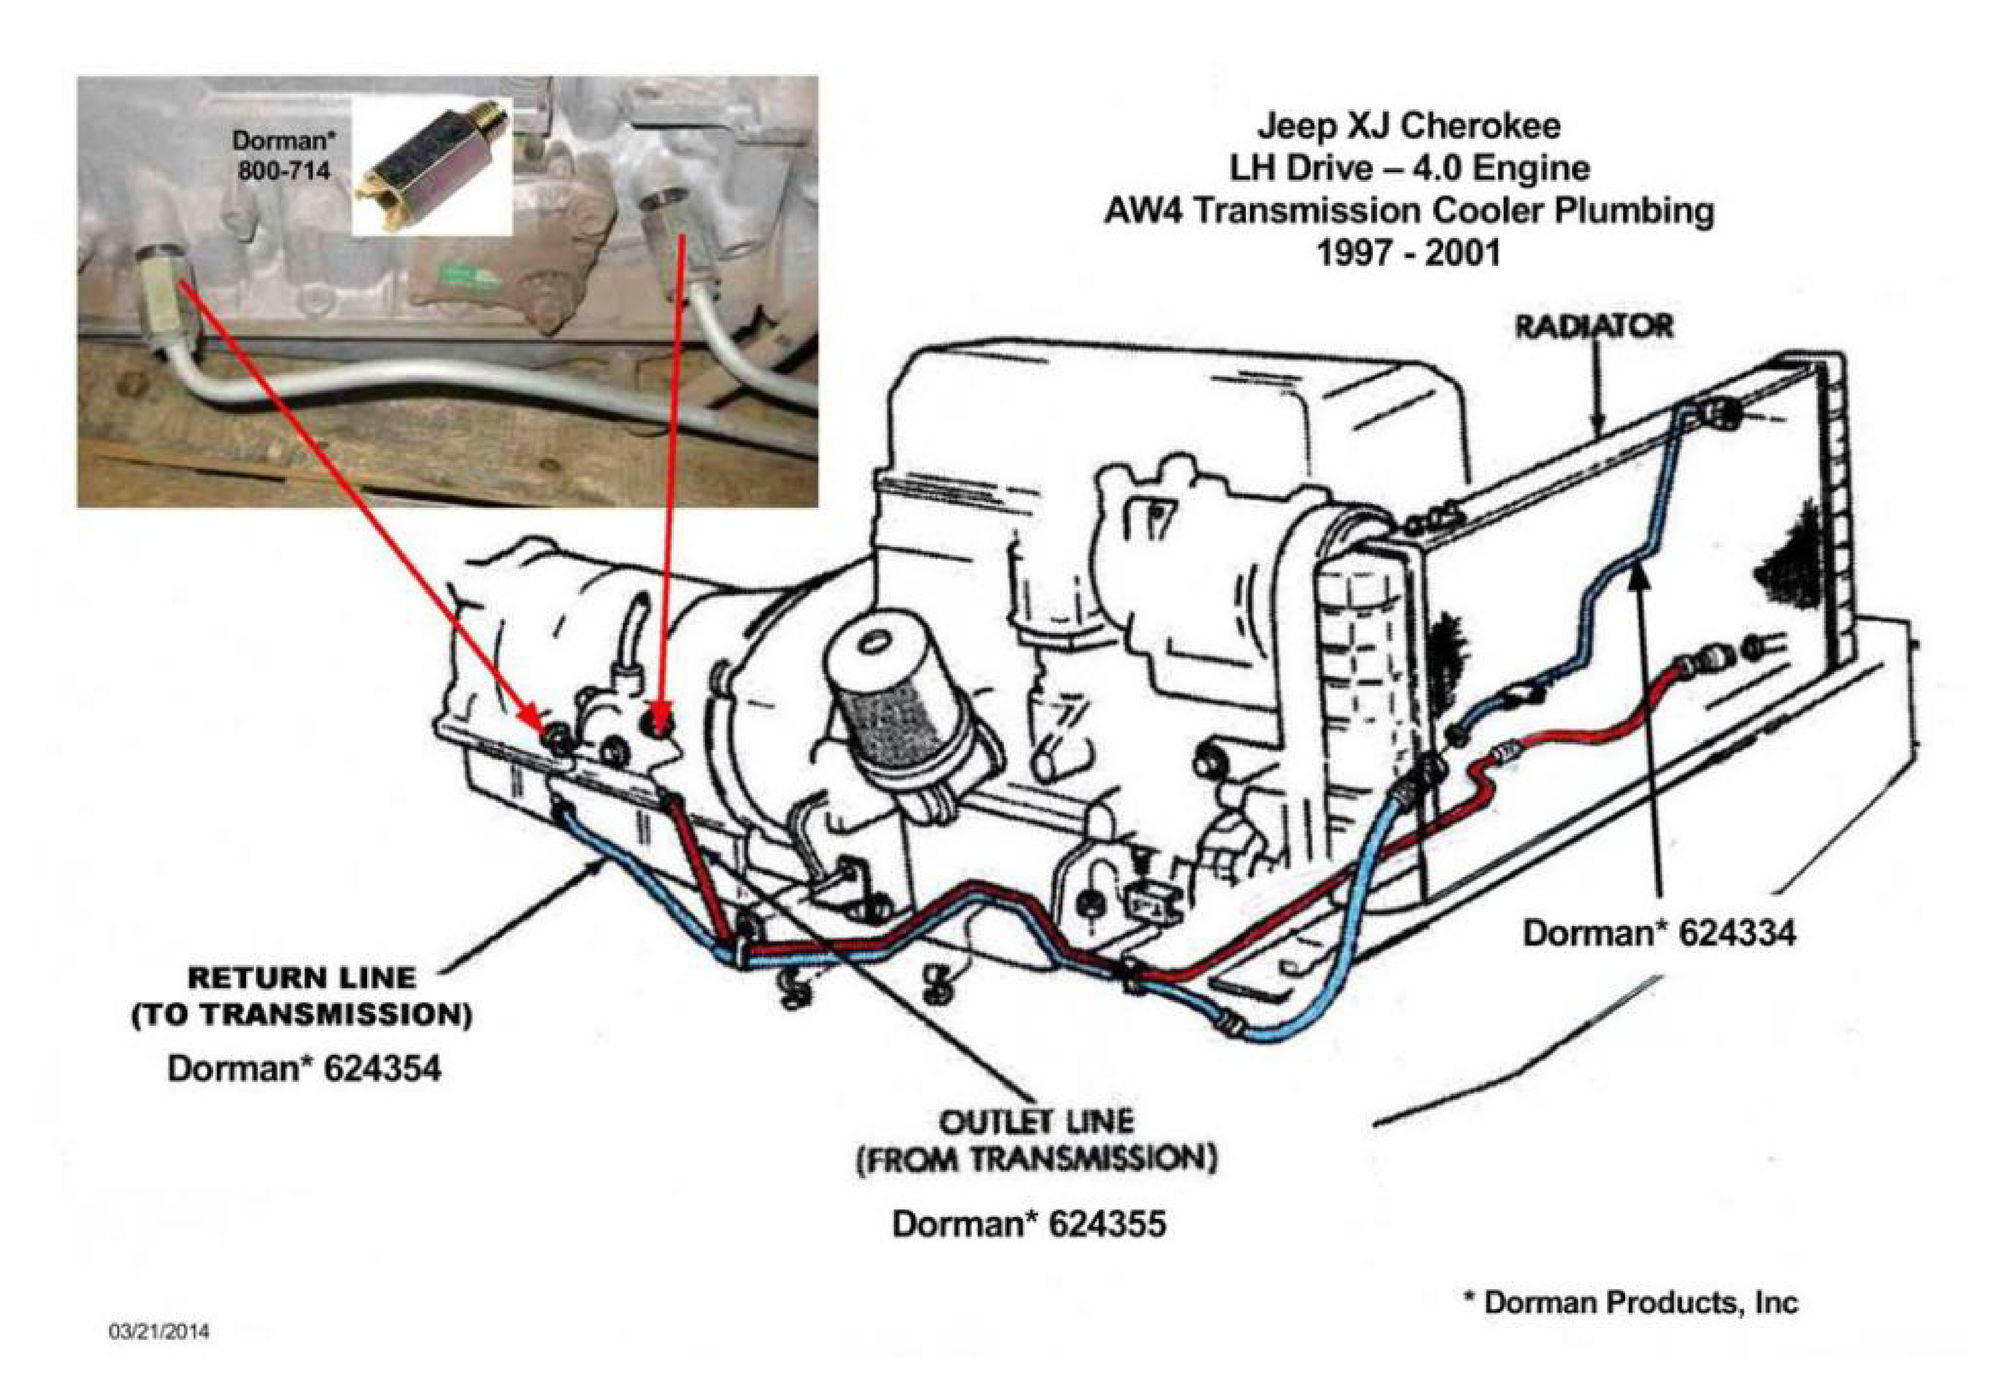 Lower transmission cooler line replacement. Which part? - Jeep Cherokee Forum 2003 Jeep Grand Cherokee Transmission Cooler Lines Diagram